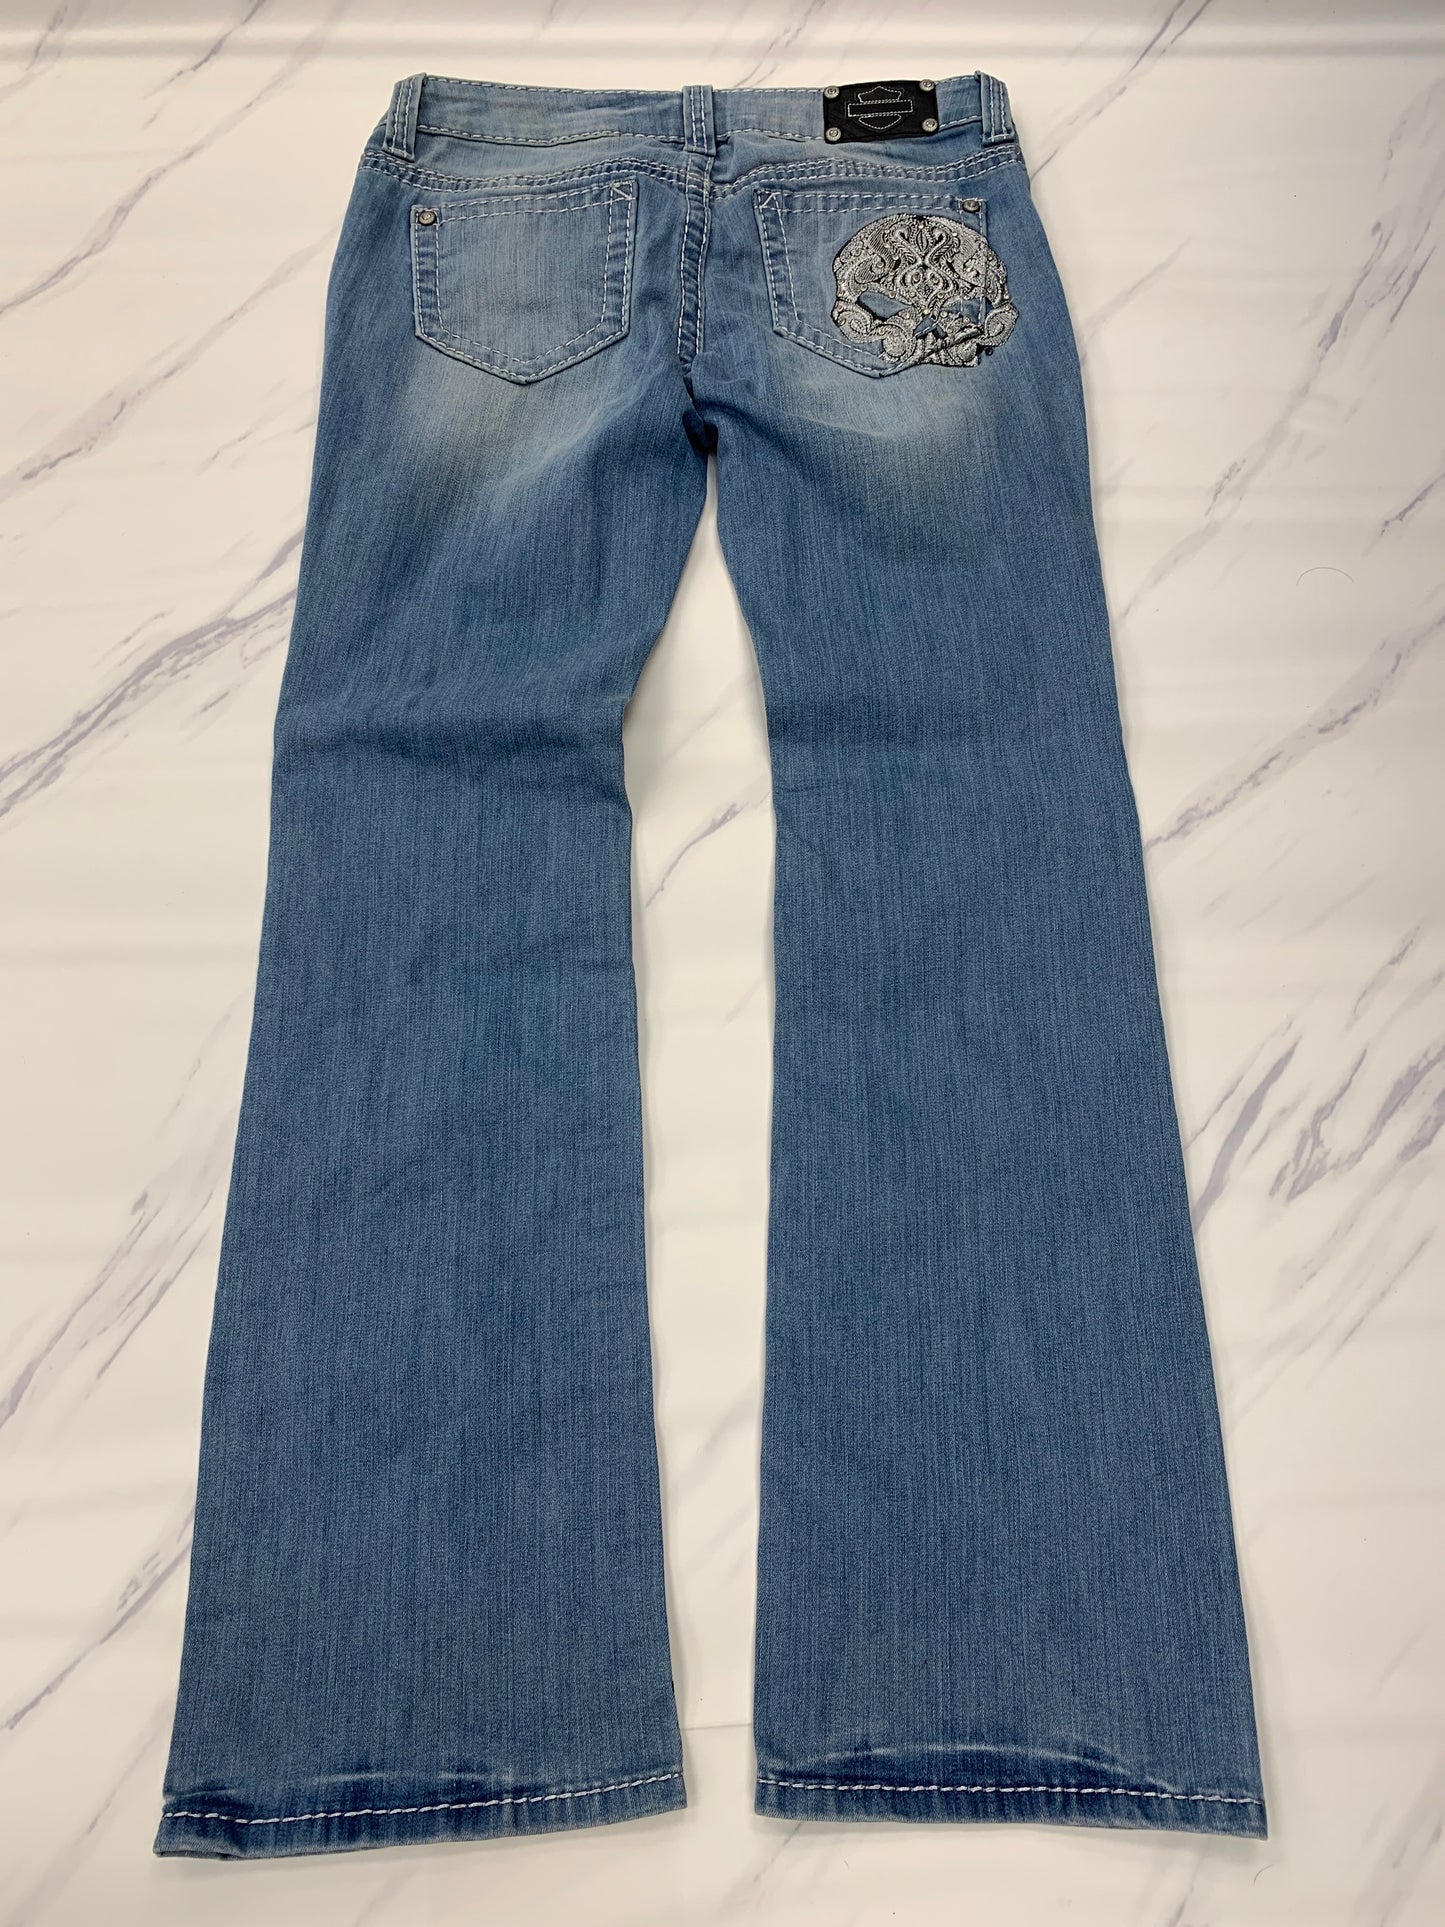 Jeans Boot Cut By Harley Davidson  Size: 10